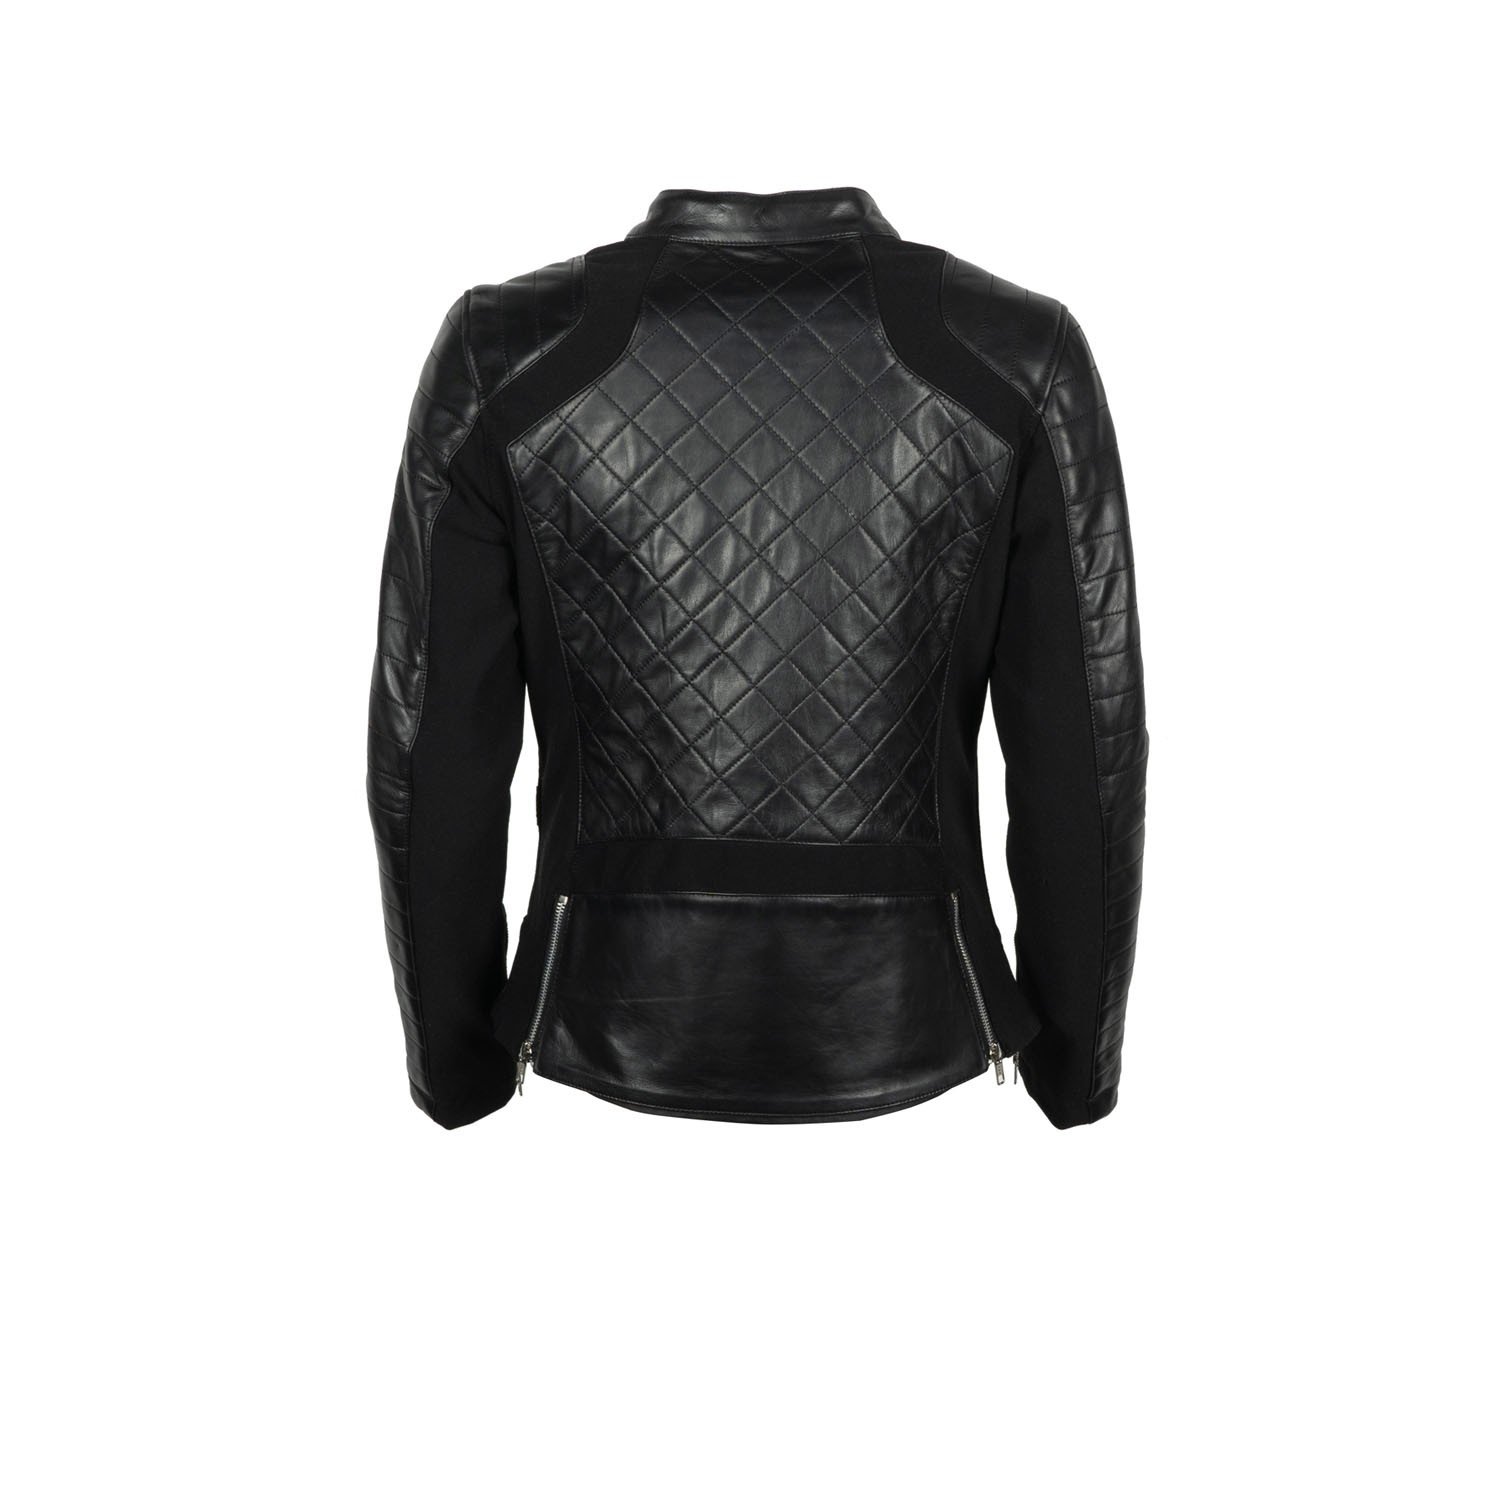 Image of Helstons Kate Leather Soft Stretch Jacket Black Size L ID 3662136085046